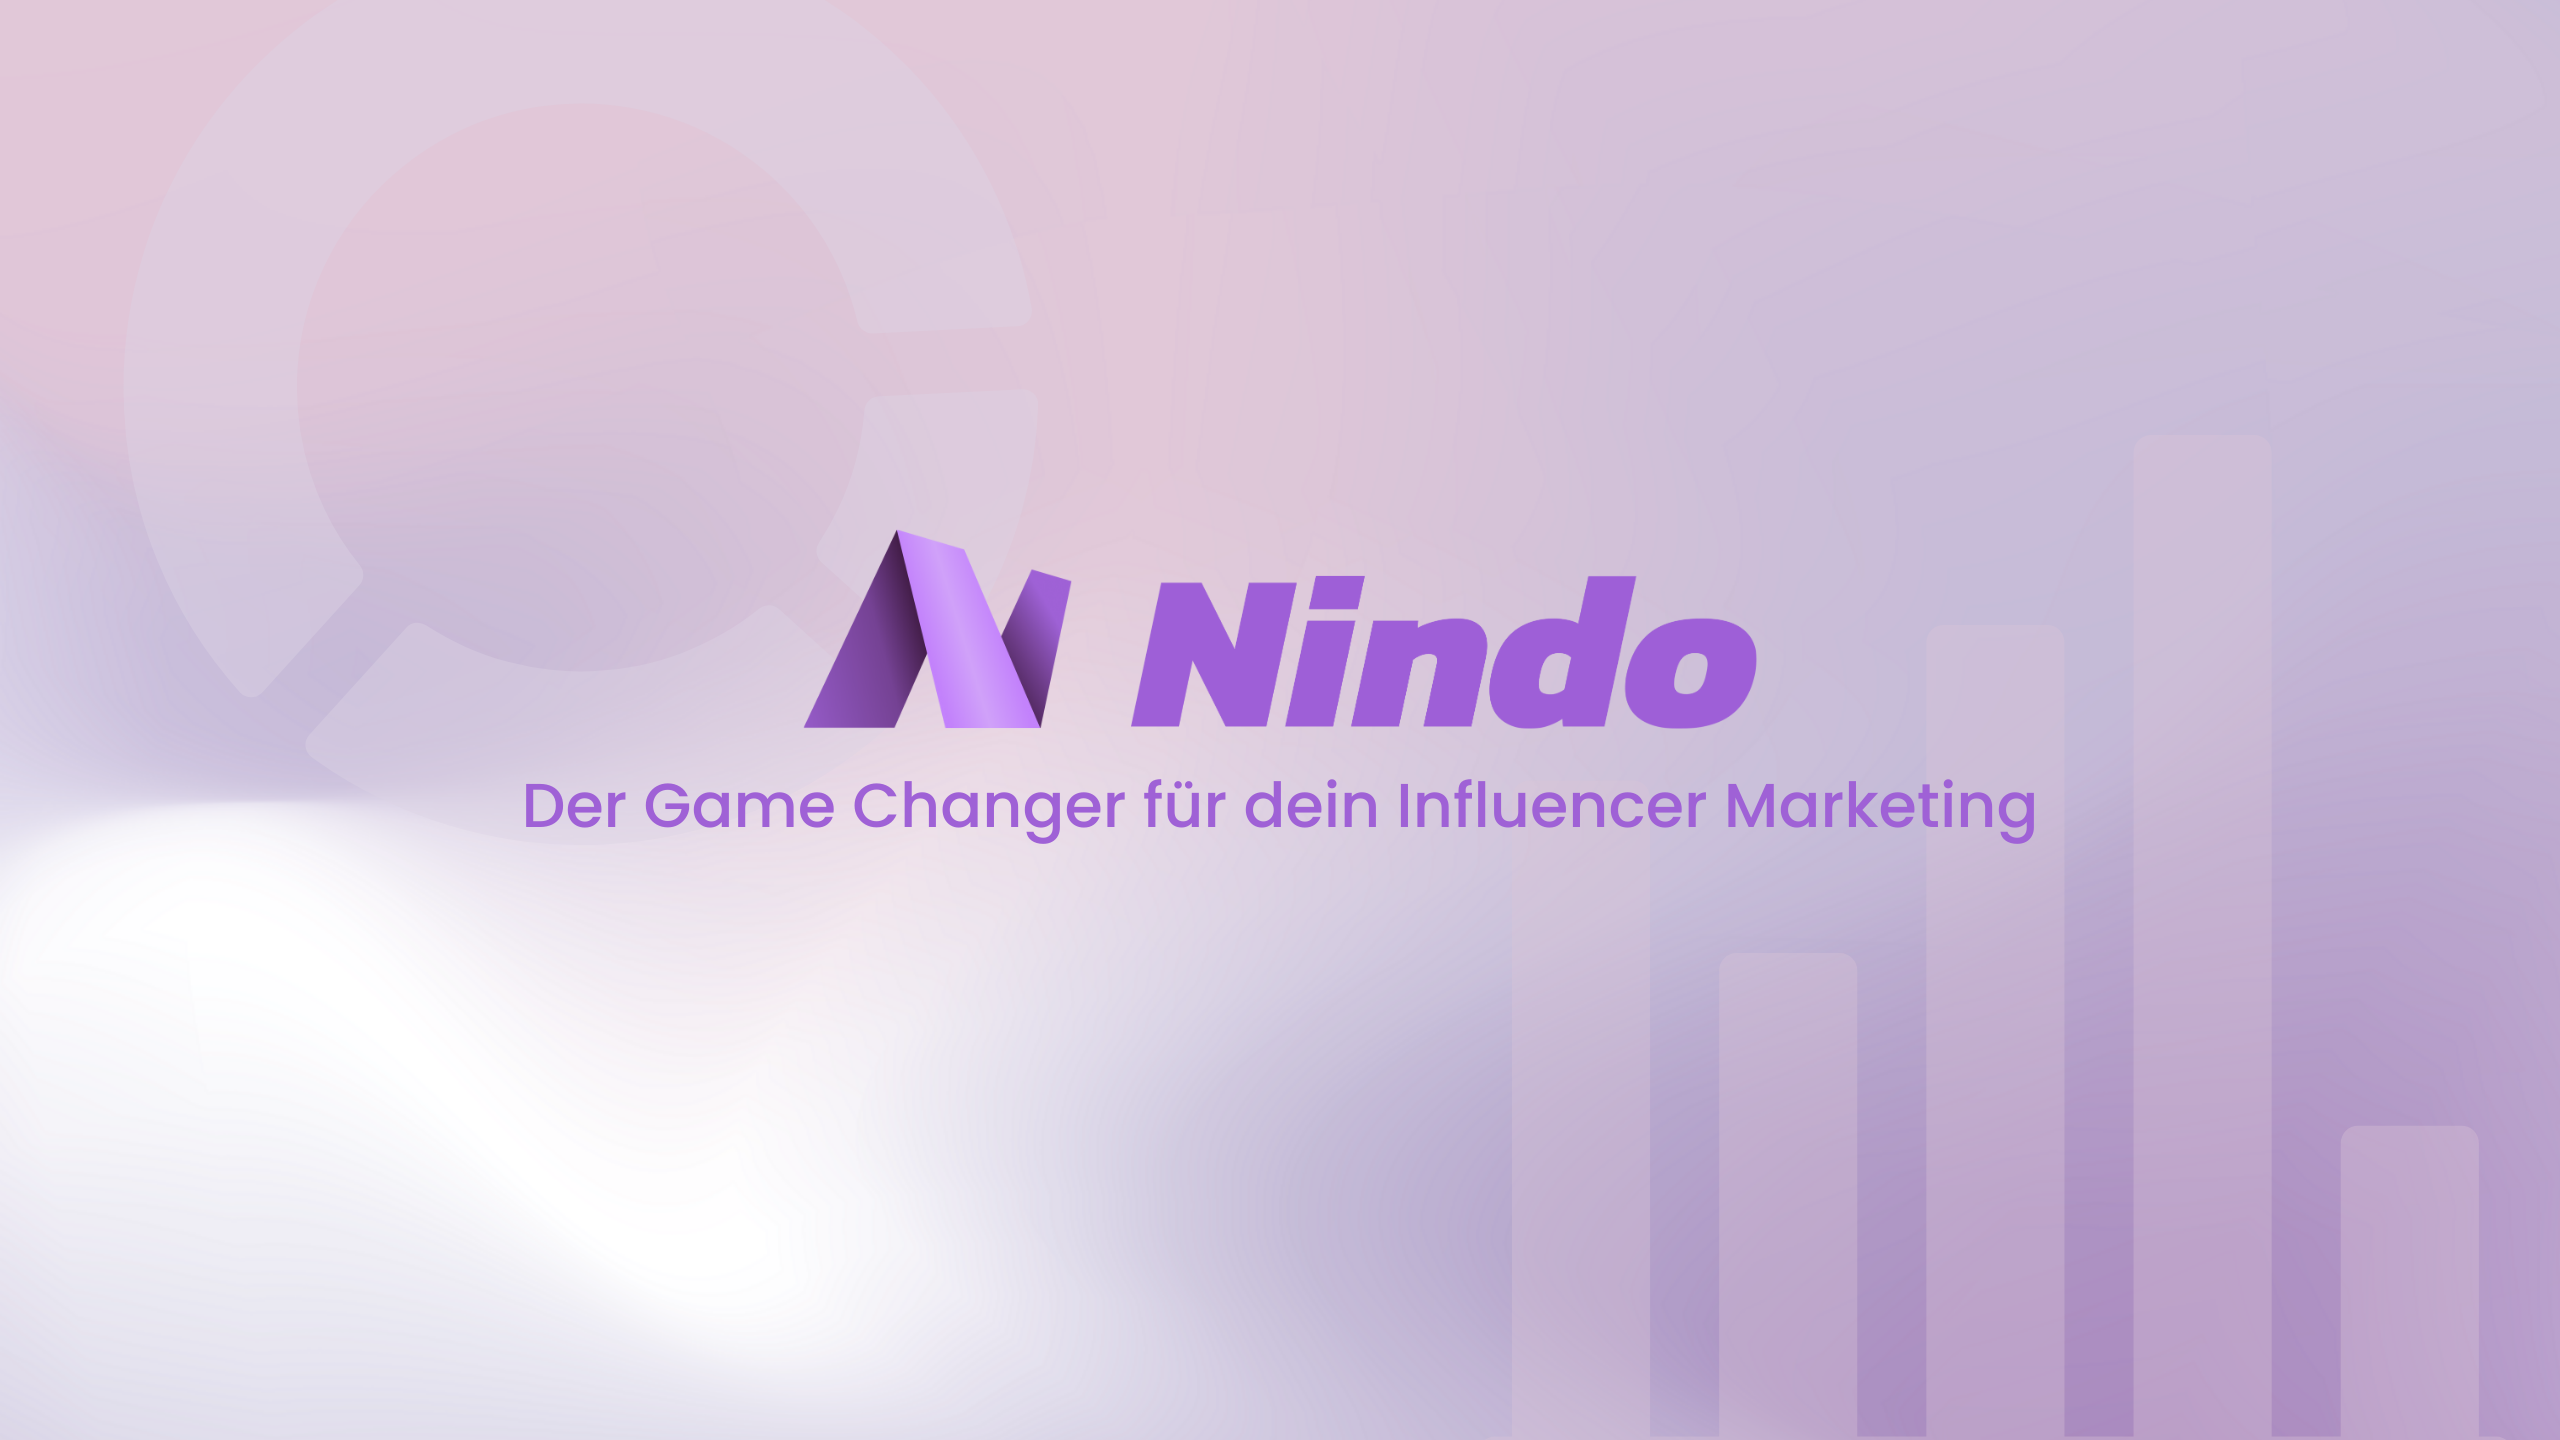 Nindo / startup from Aachen / Background